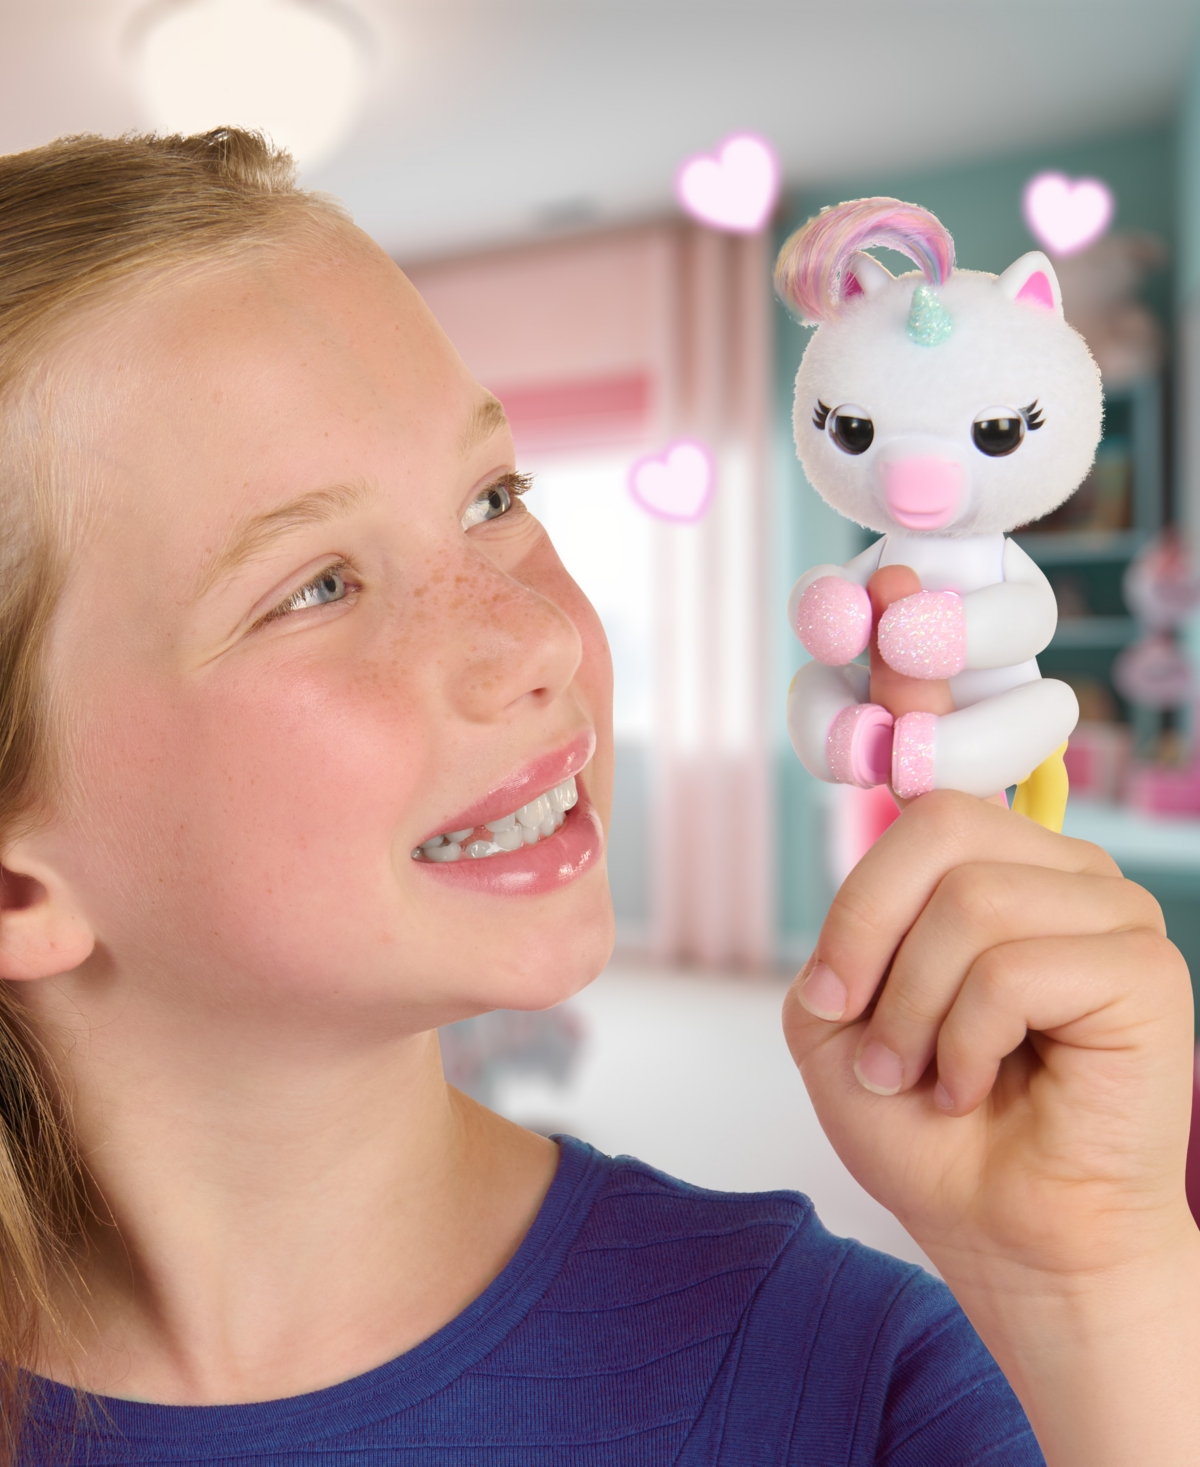 Shop Fingerlings Interactive Baby Unicorn Lulu, 70+ Sounds & Reactions, Heart Lights Up In No Color